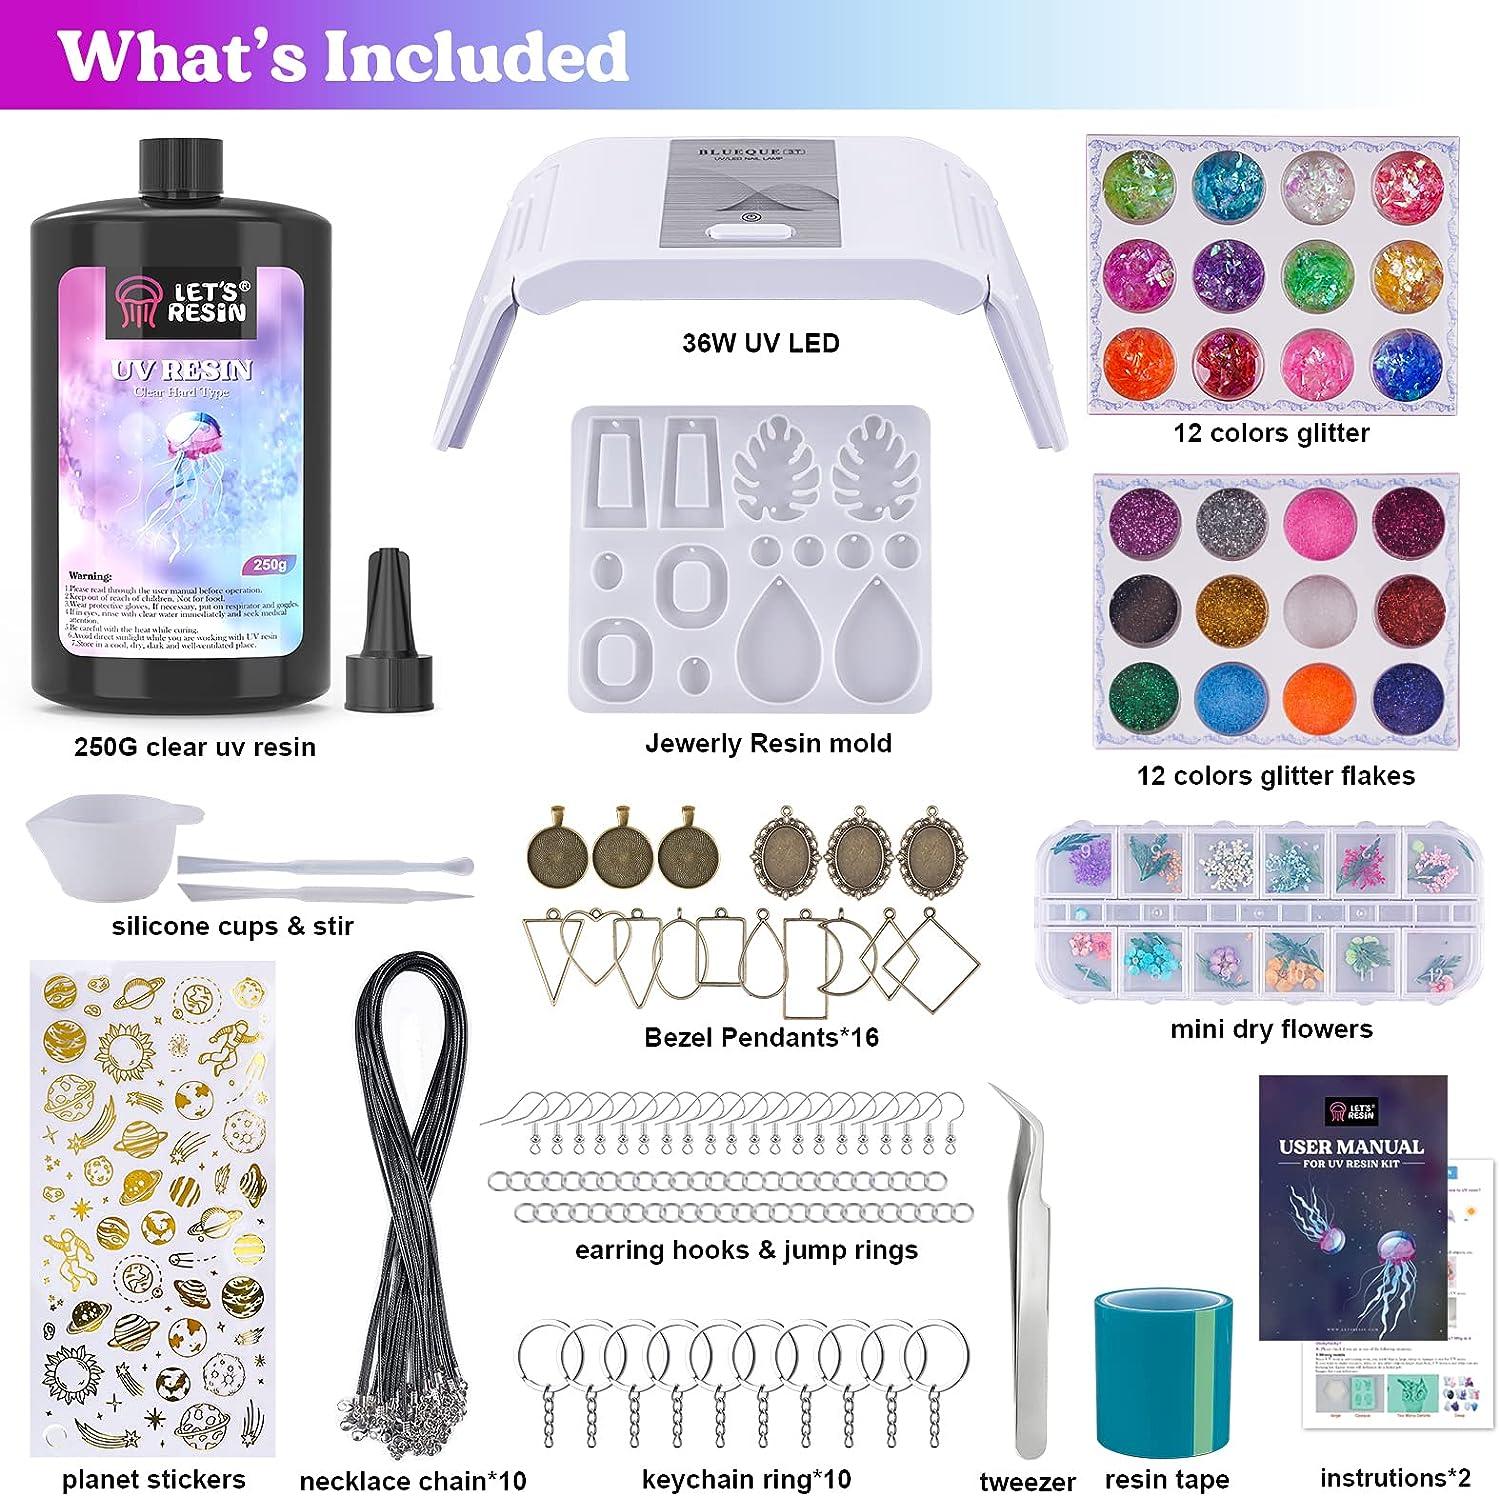 Let's Resin Uv Resin Kit With Light153pcs Resin Jewelry -  Finland